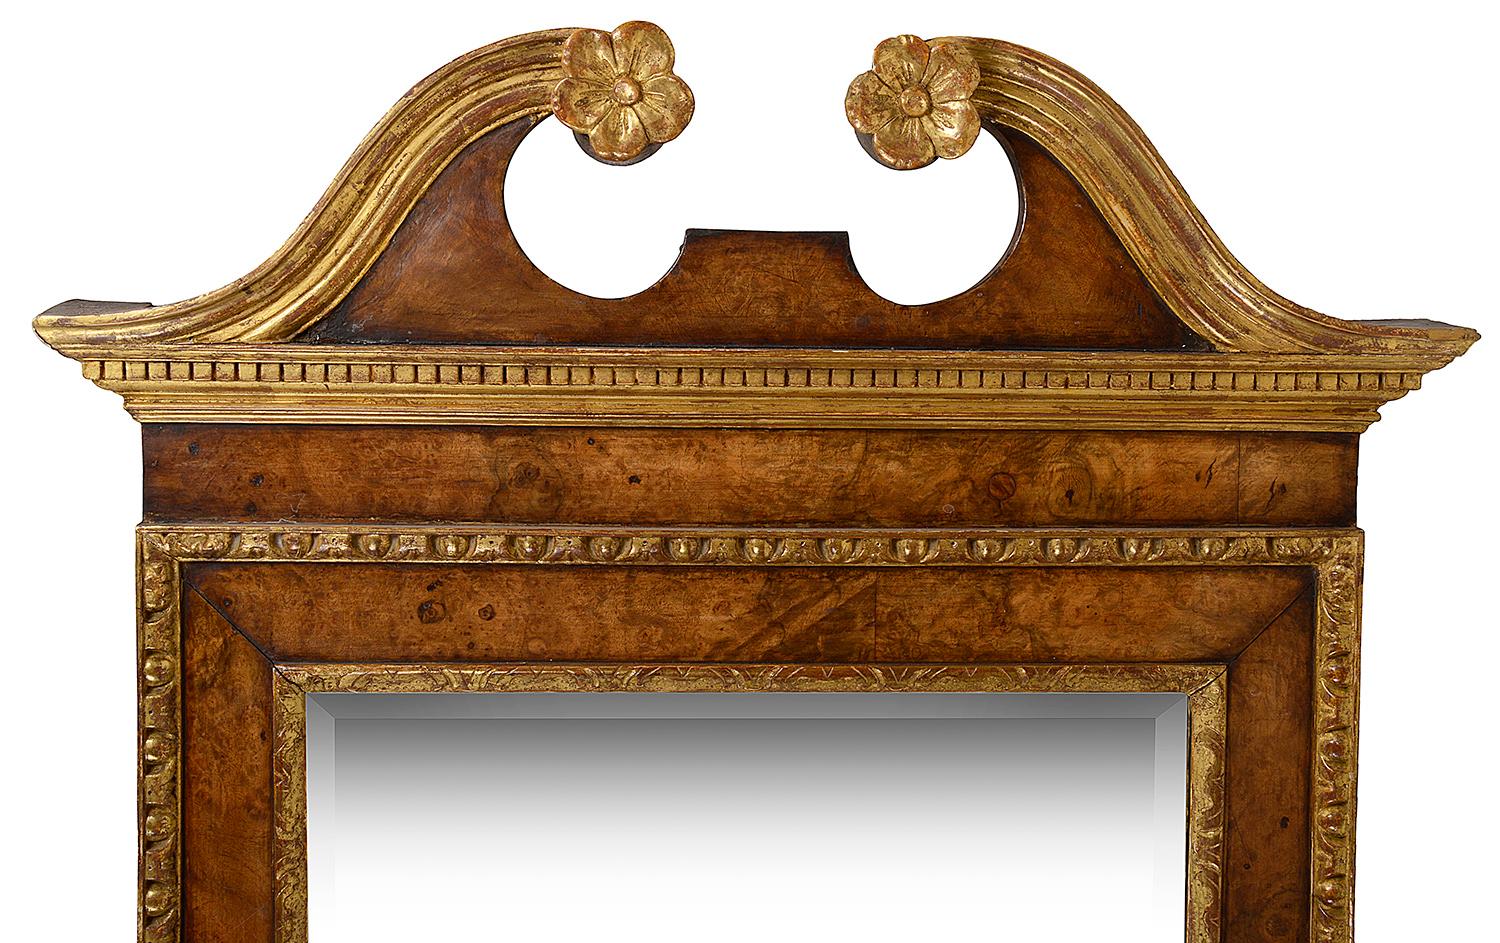 A good quality George 11, 18th century style walnut and parcel-gilt pier glass wall mirror, having carved swan neck pediment, burr walnut veneers, and carved fruit and leaf decoration to the base. Measures: 150cm (59